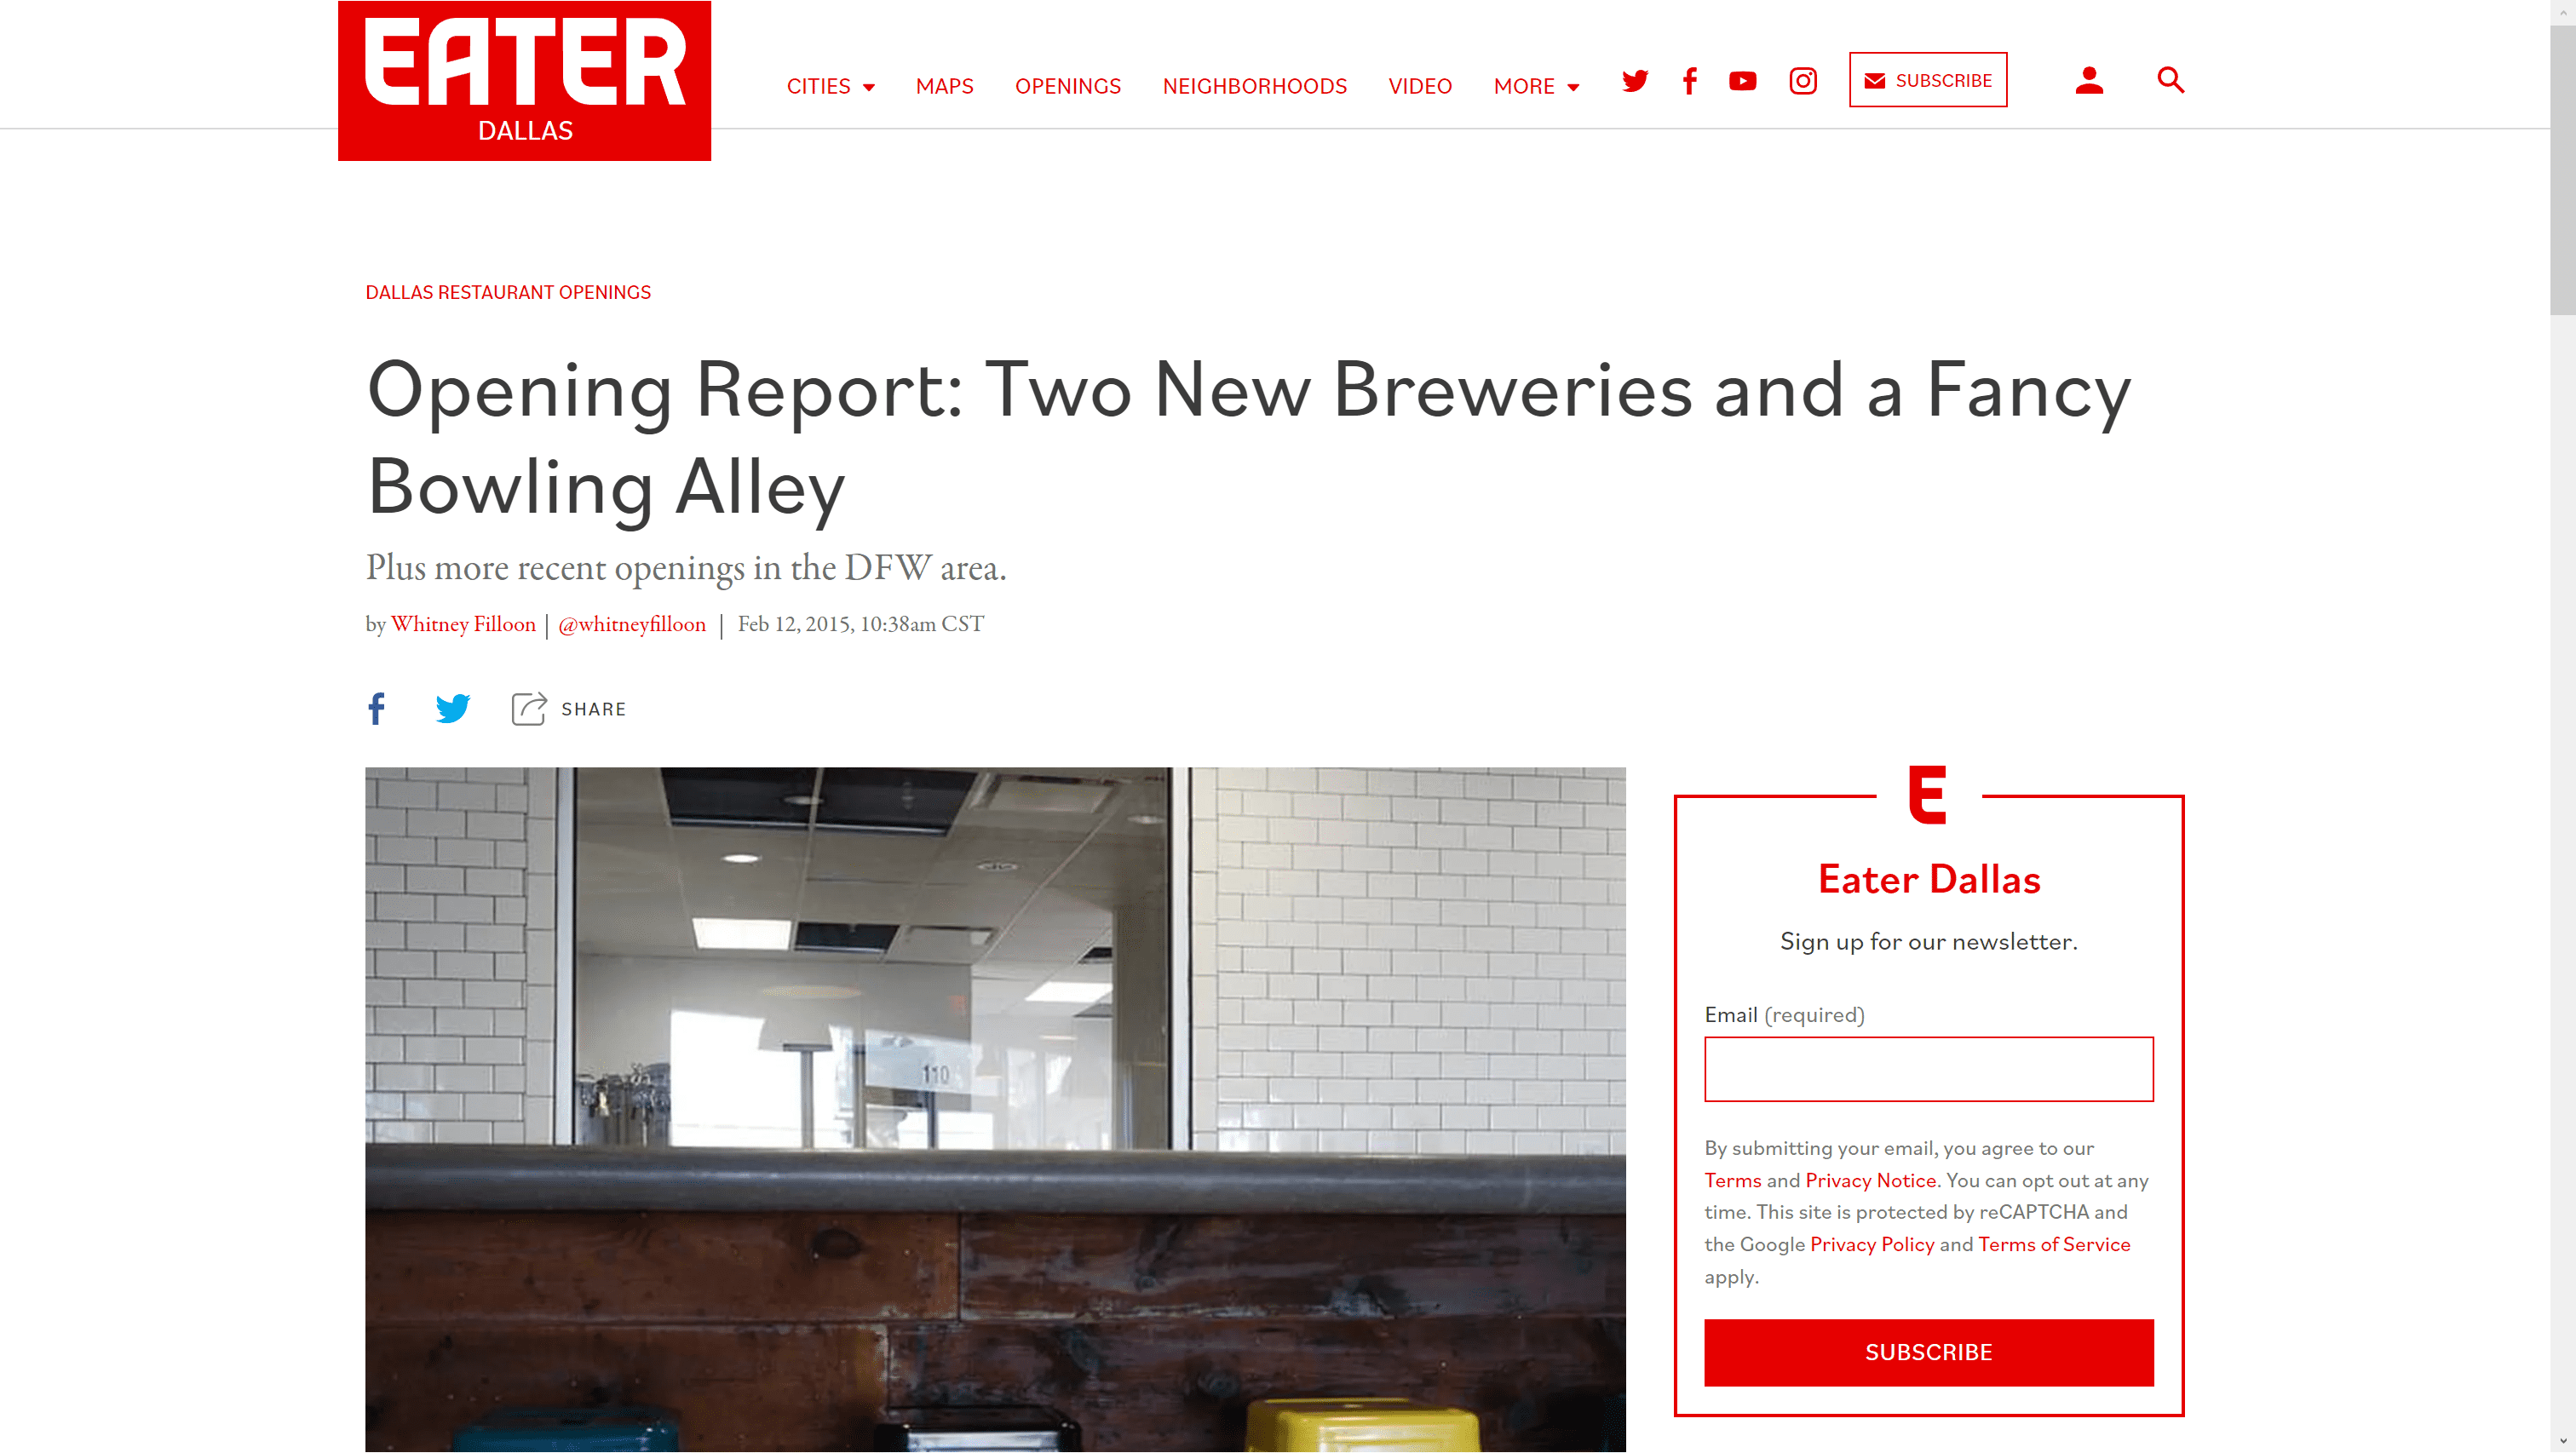 Two New Breweries Opening Report in Eater Dallas